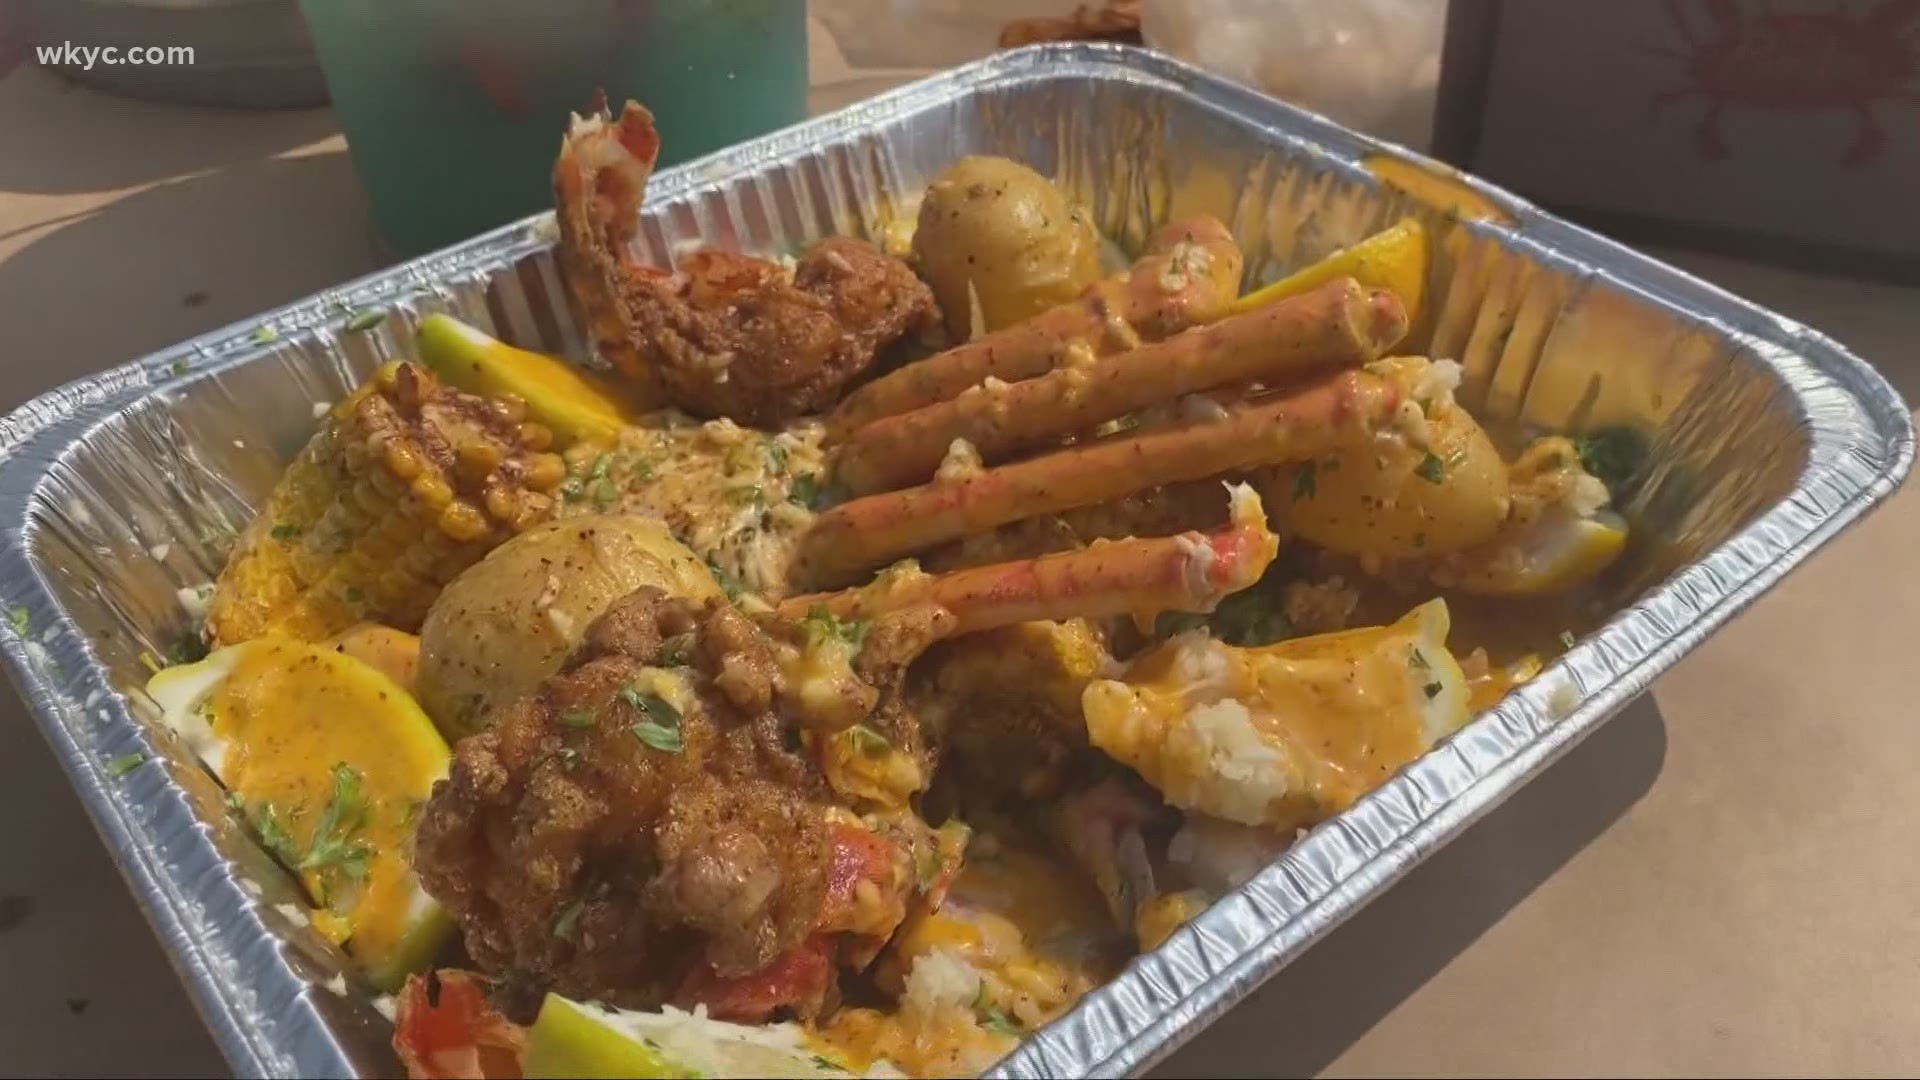 Do you love seafood? Boiler 65 is definitely the place for you! Austin Love takes us on a food tour of this restaurant in Cleveland's Gordon Square.